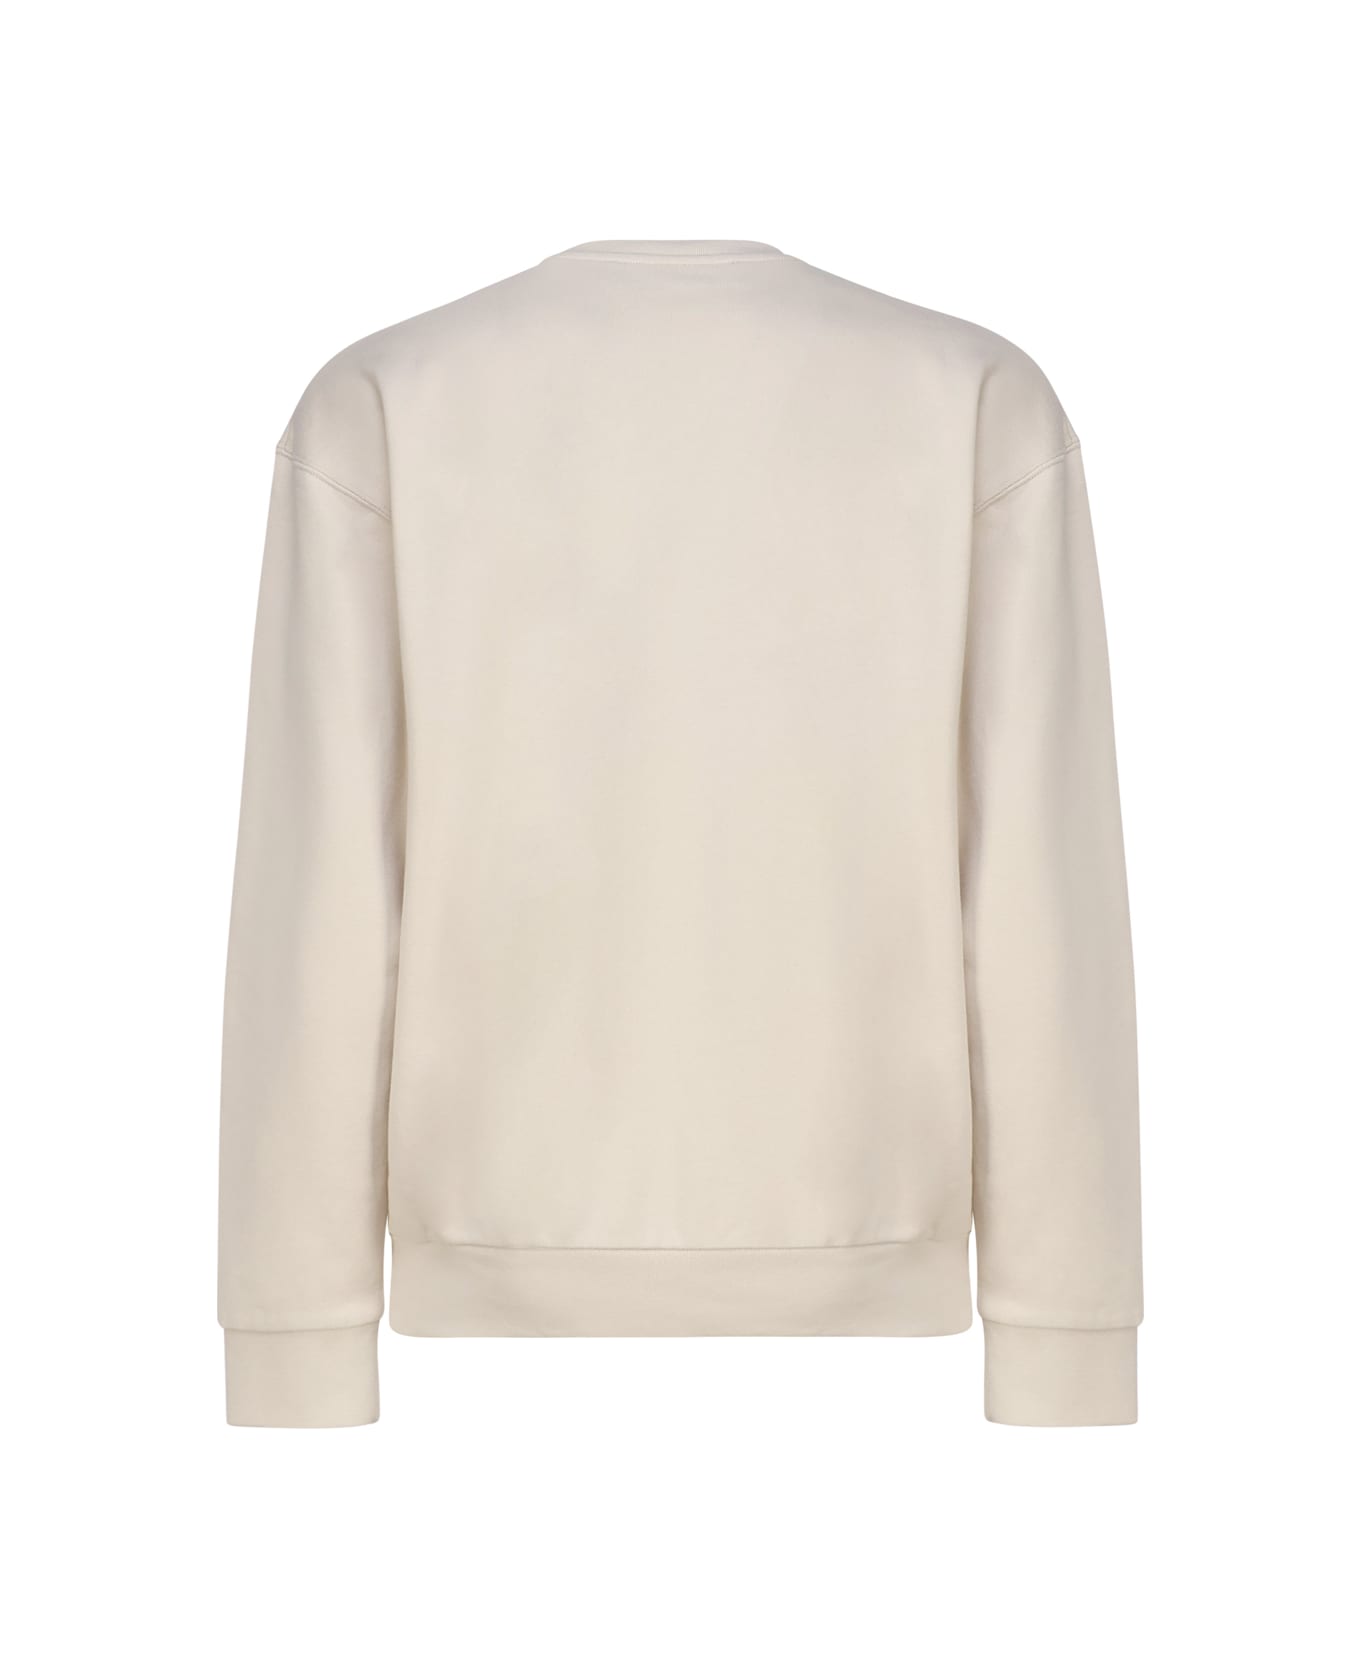 J.W. Anderson Sweatshirt With Embroidery - White